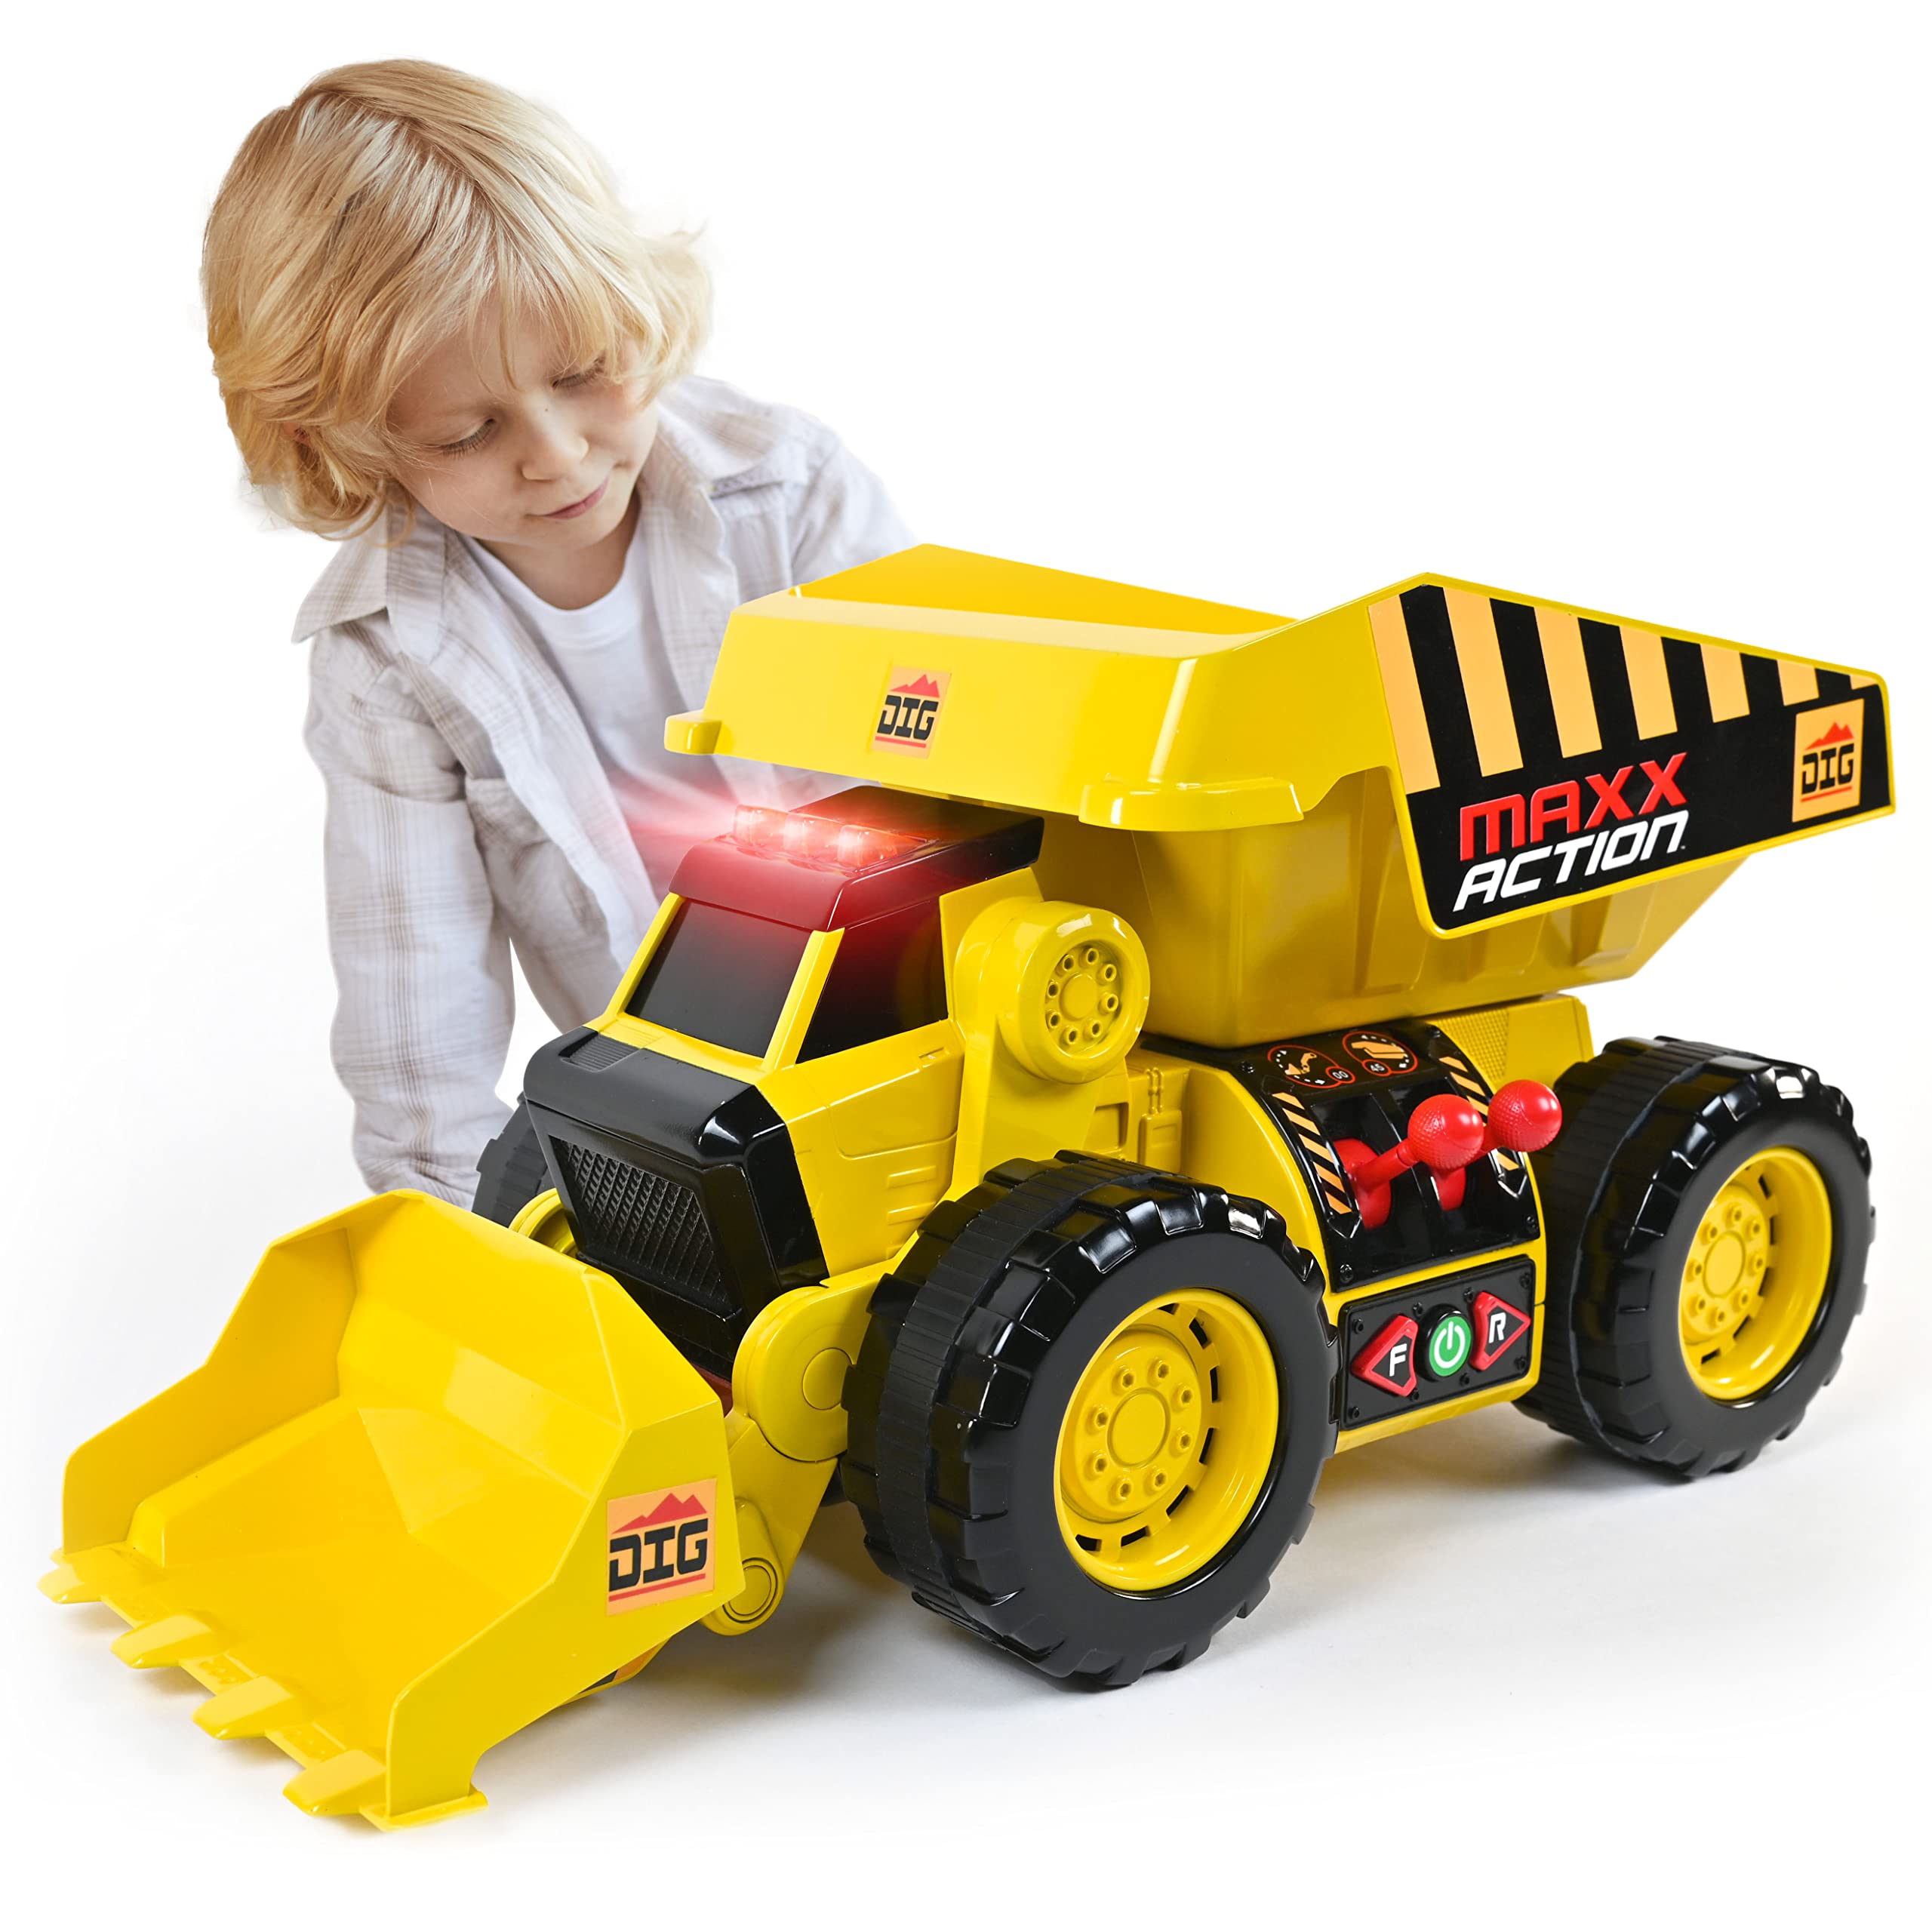 Sunny Days Entertainment 2-N-1 Dig Rig – Dump Truck and Front End Loader with Lights, Sounds and Motorized Drive, Yellow, Large